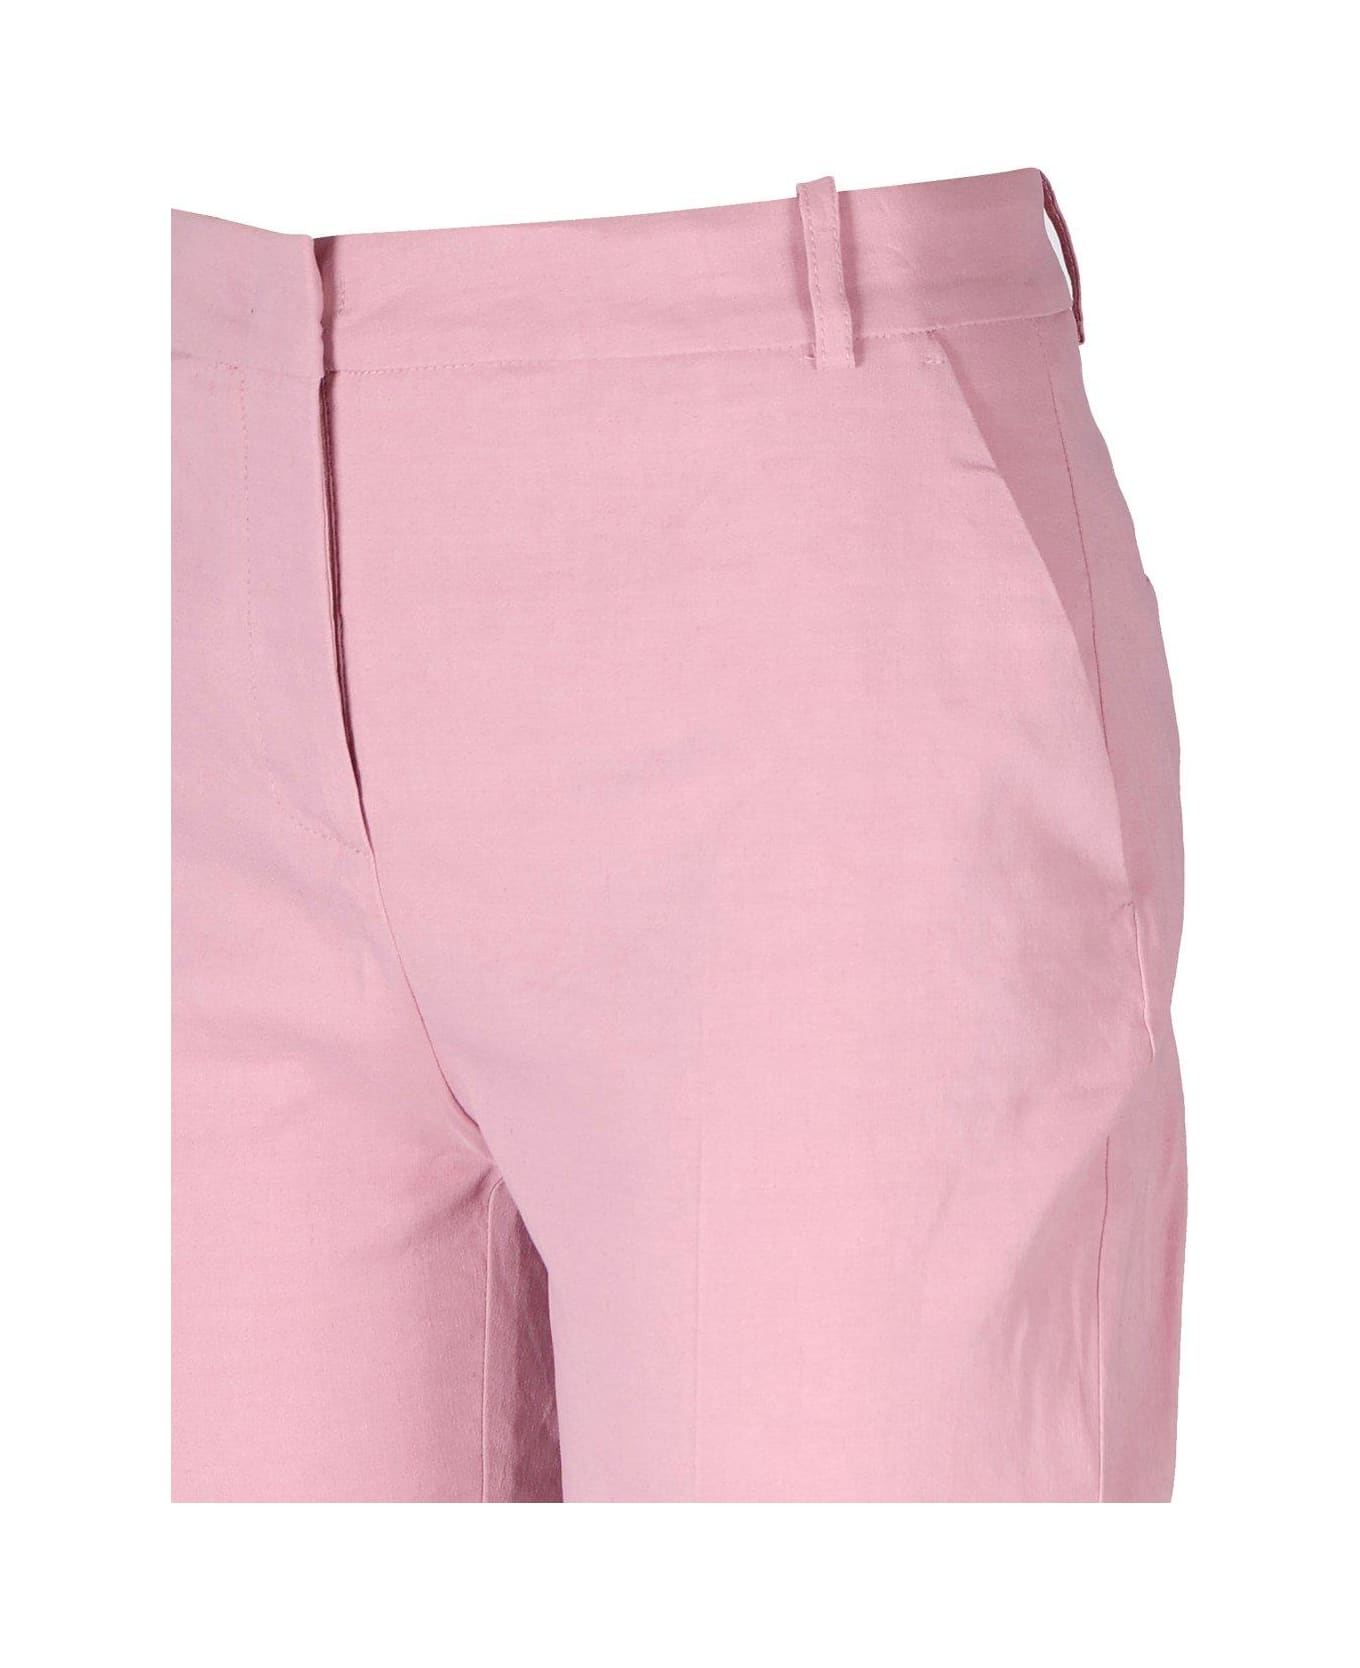 Pinko Mid-rise Skinny Trousers - Pink ボトムス